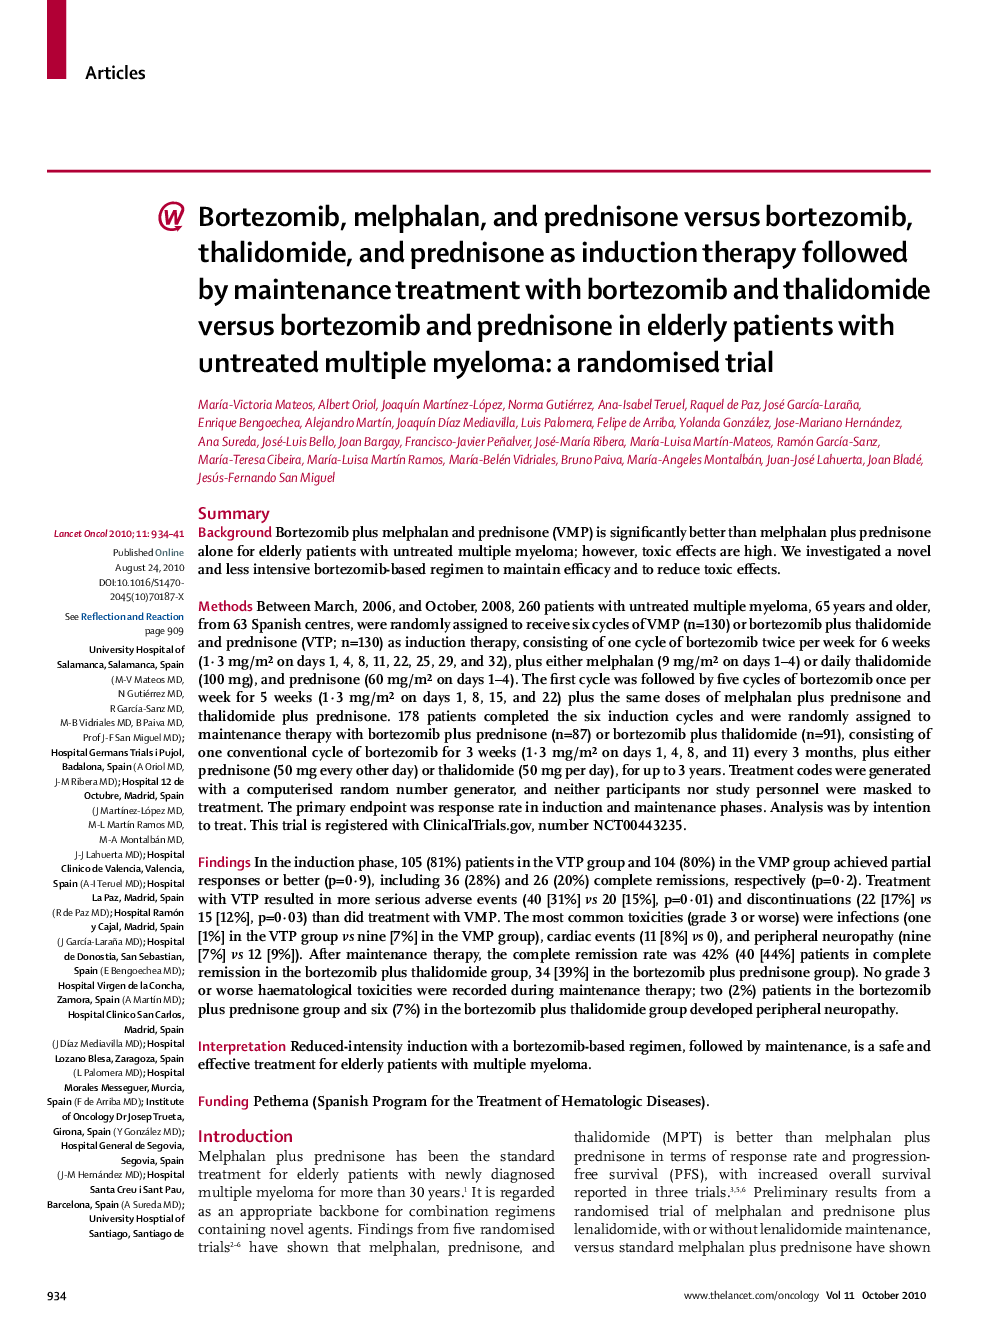 Bortezomib, melphalan, and prednisone versus bortezomib, thalidomide, and prednisone as induction therapy followed by maintenance treatment with bortezomib and thalidomide versus bortezomib and prednisone in elderly patients with untreated multiple myelom